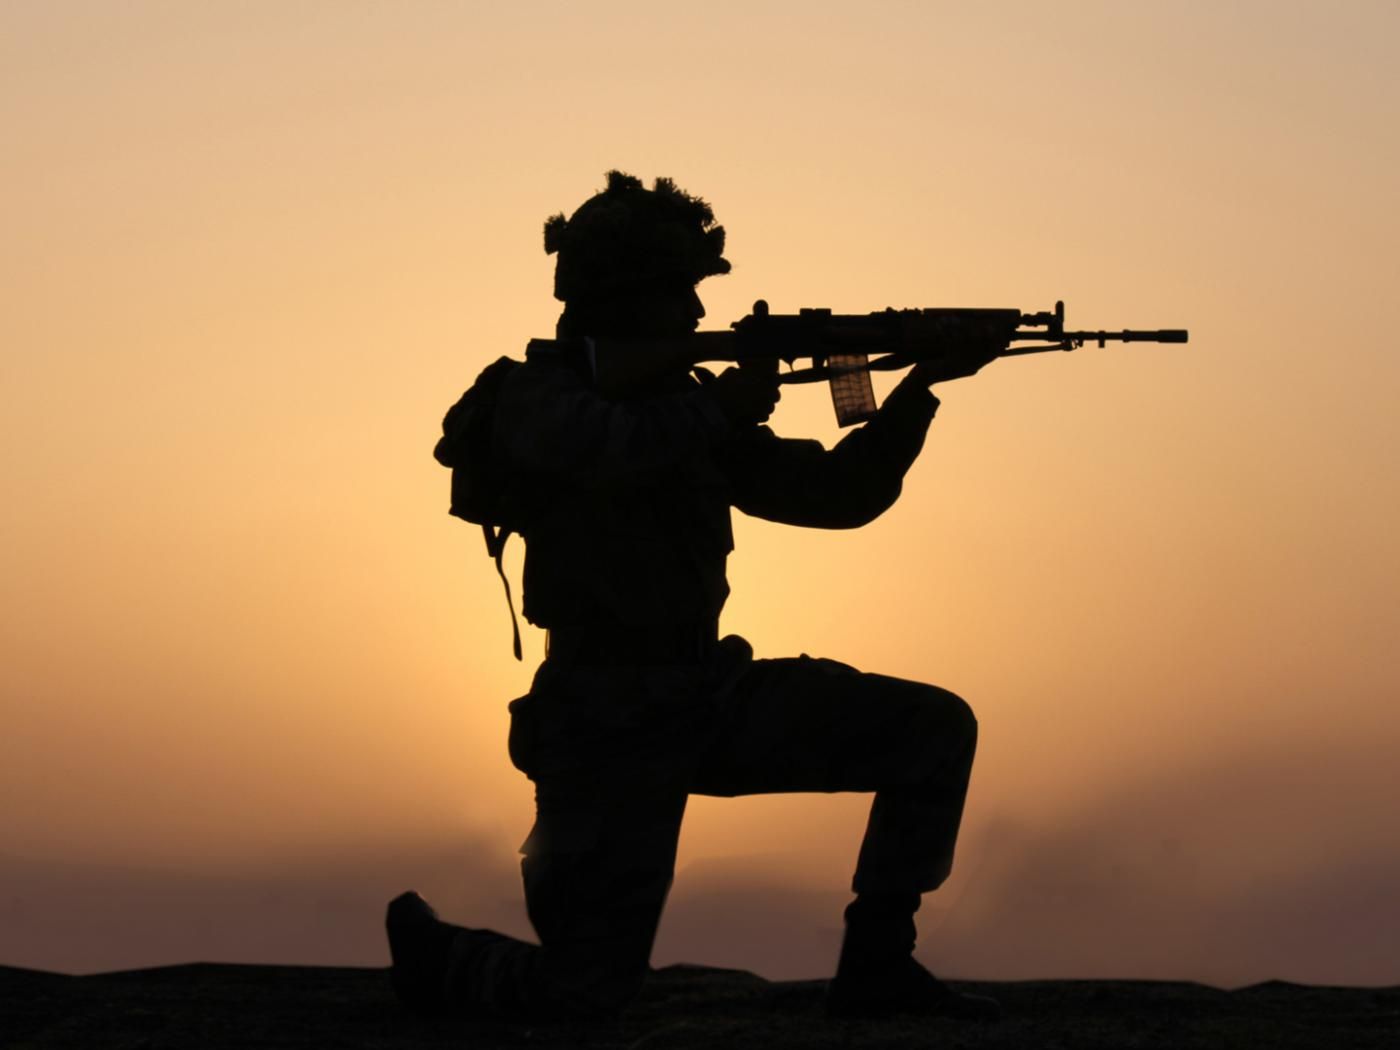 Indian Army Wallpaper with Soldier in Silhouette Wallpaper. Wallpaper Download. High Resolution Wallpaper